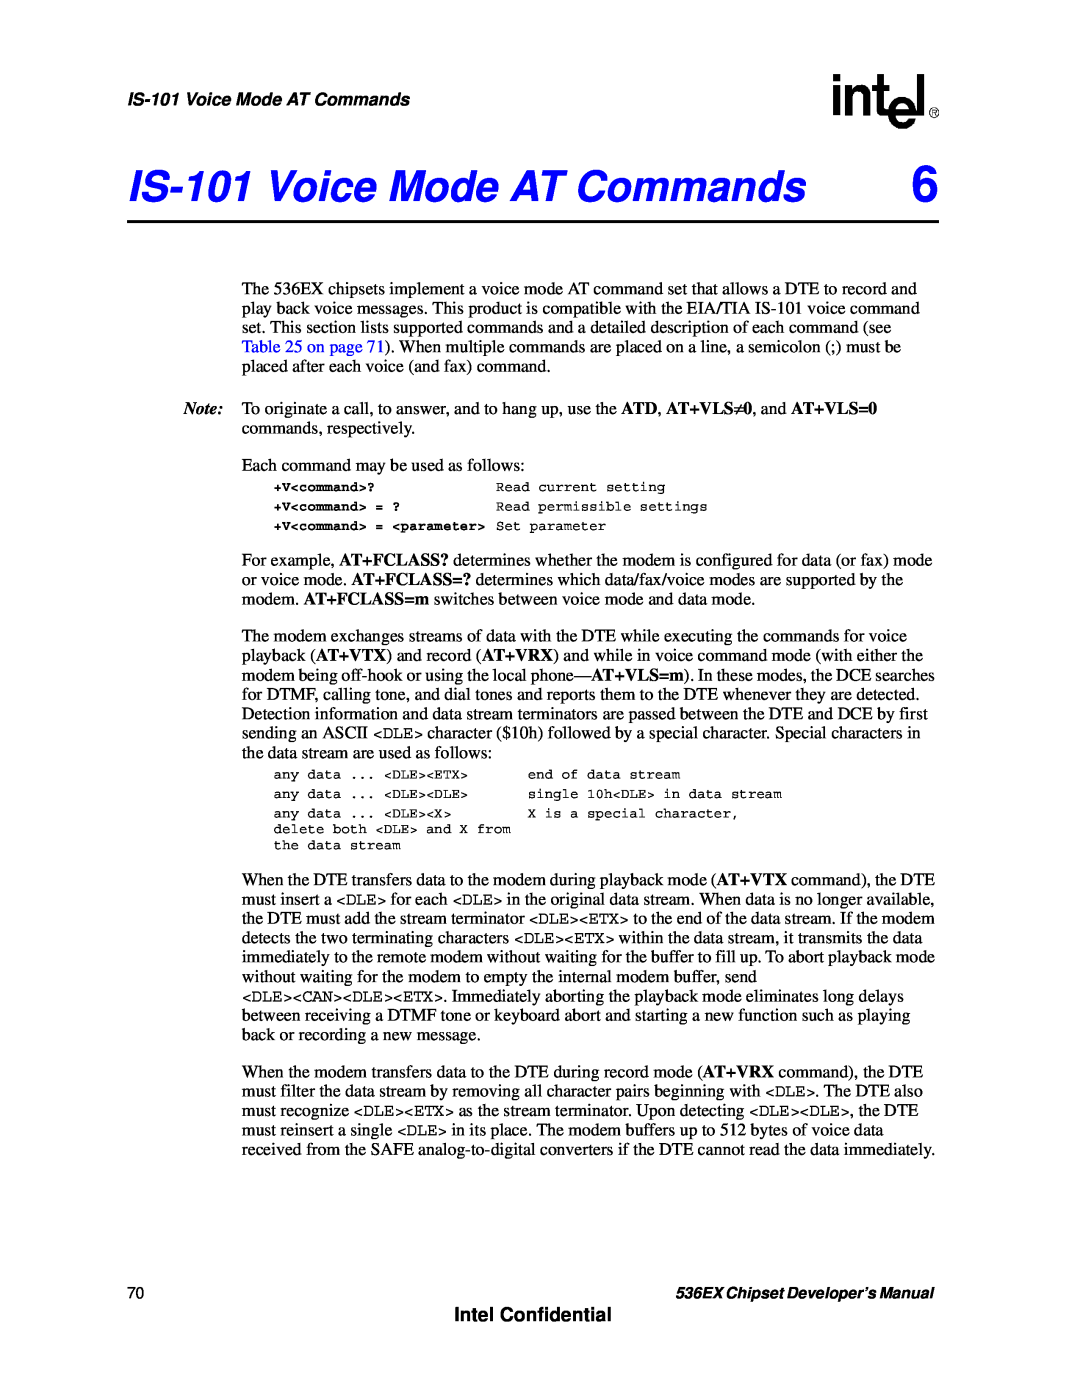 Intel 536EX manual IS-101Voice Mode AT Commands, Intel Confidential 